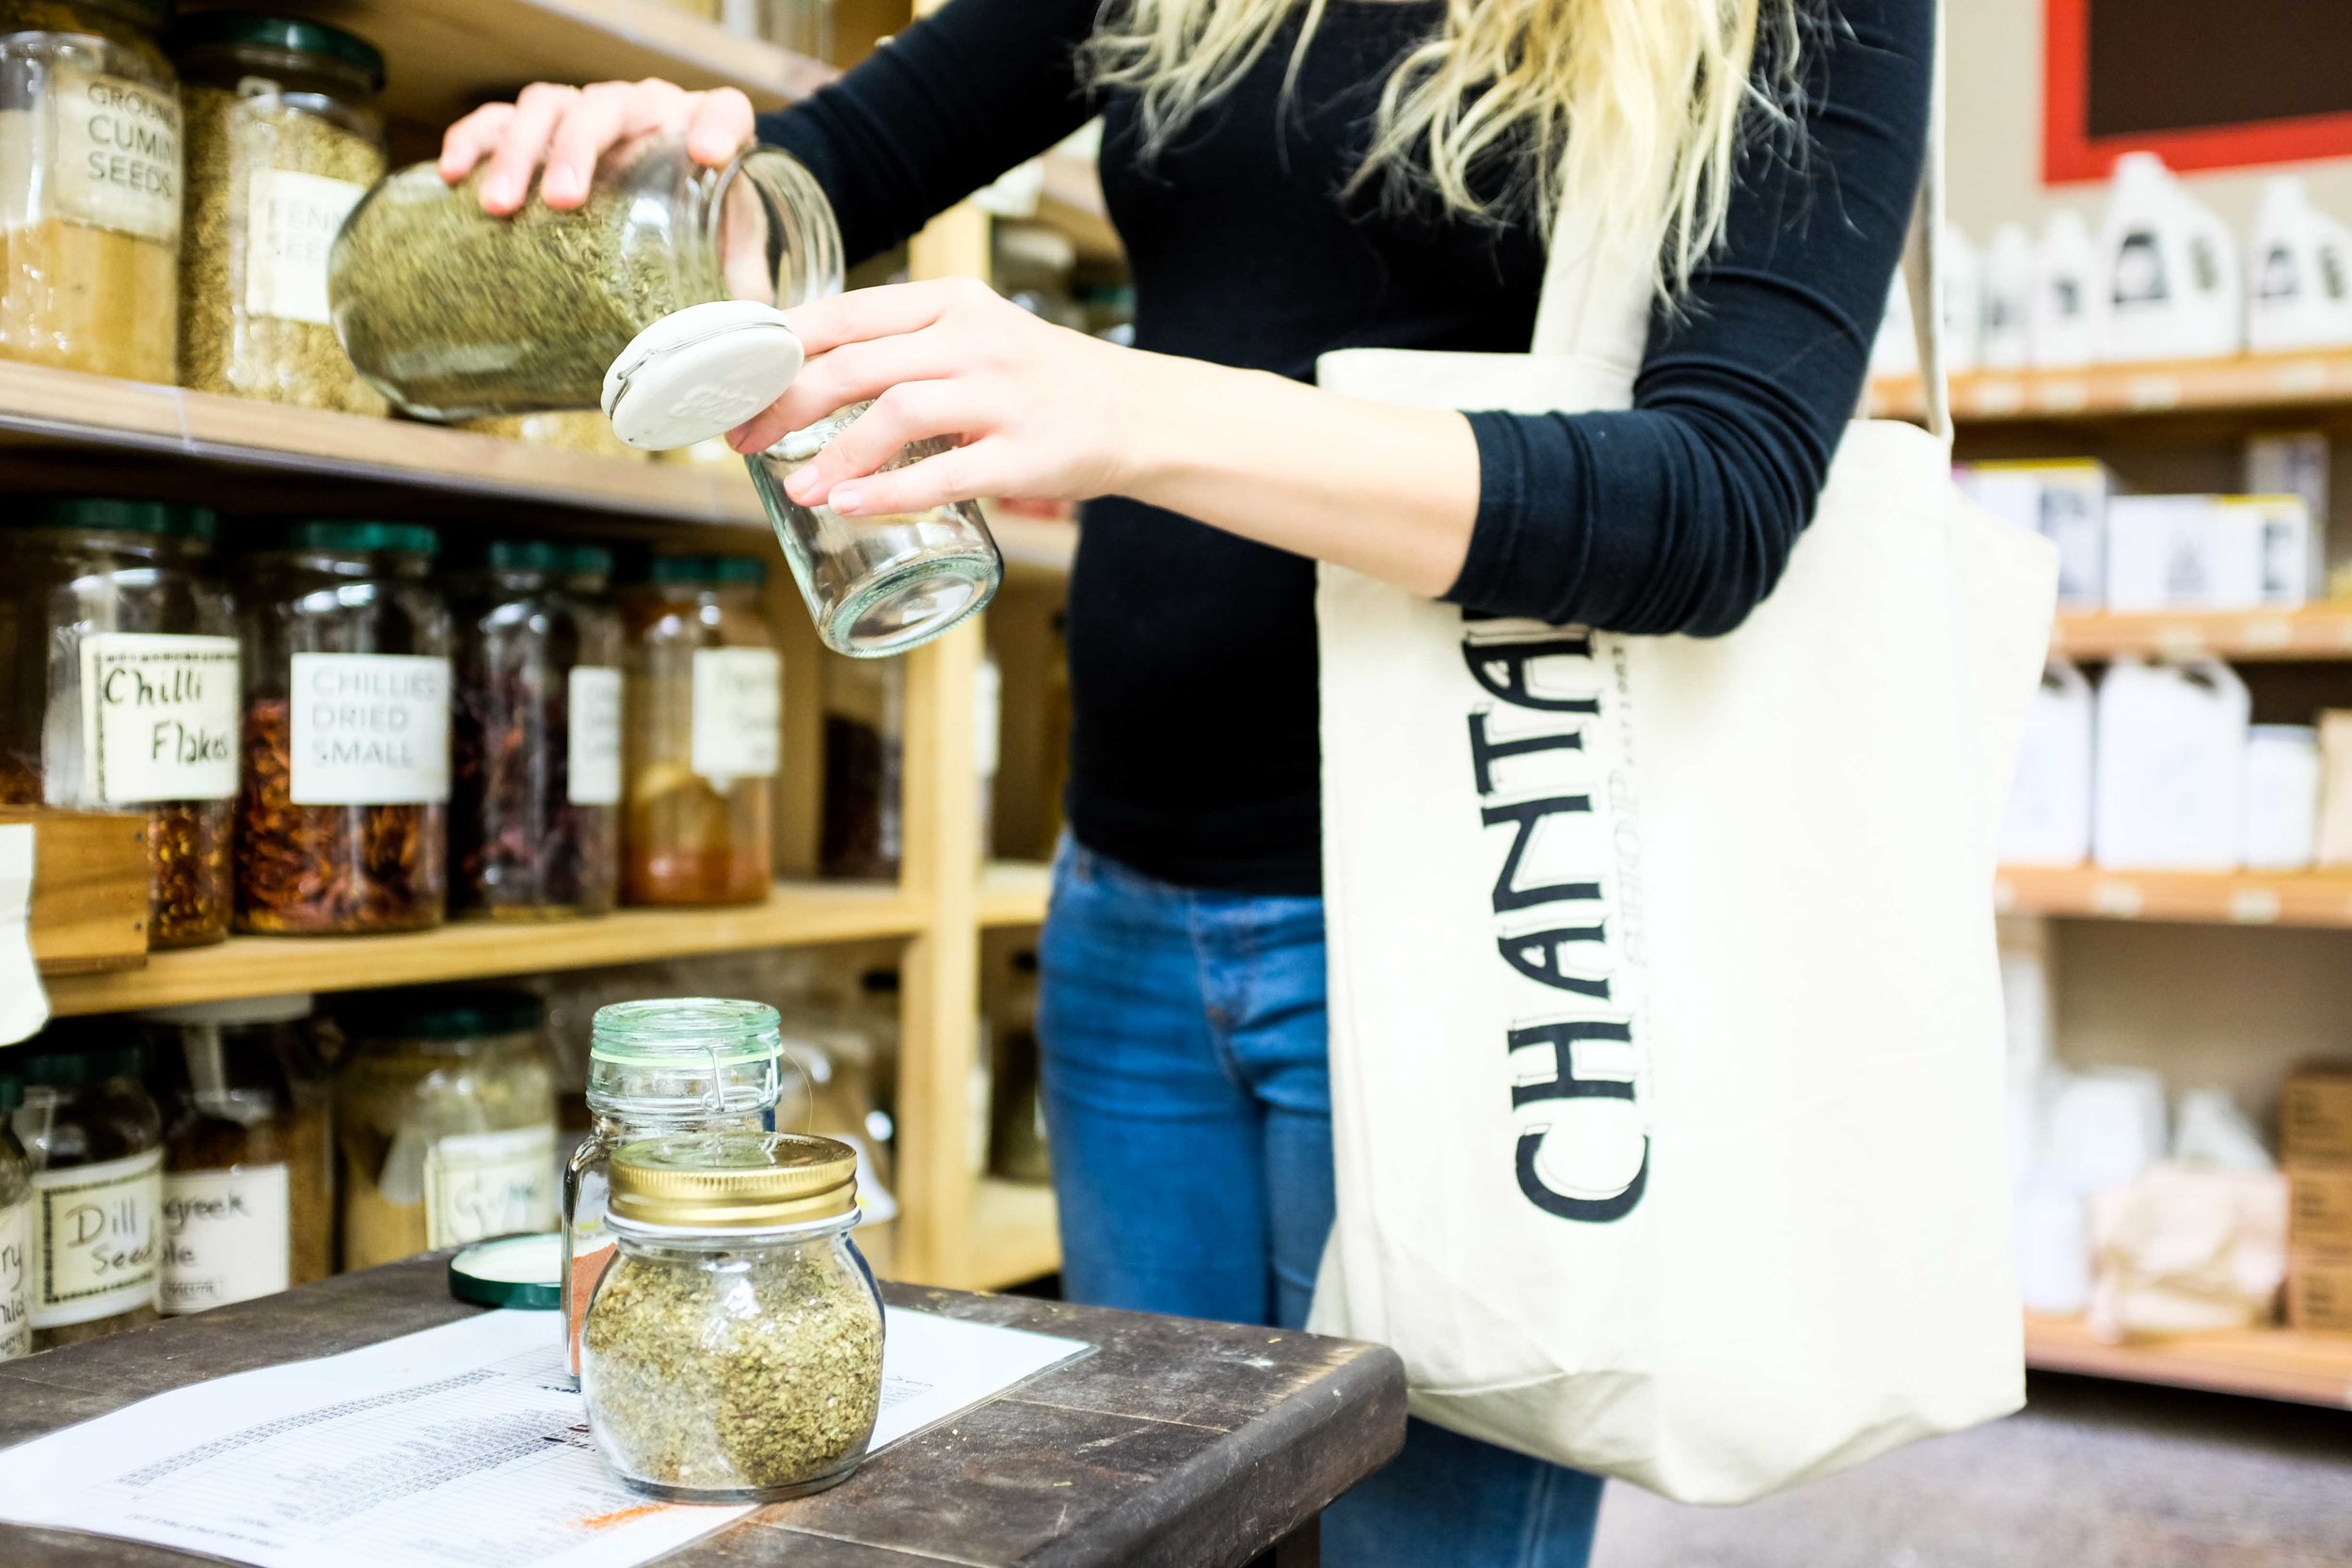 "Being able to support my zero waste lifestyle by shopping the bulk bins at Chantal is brilliant."